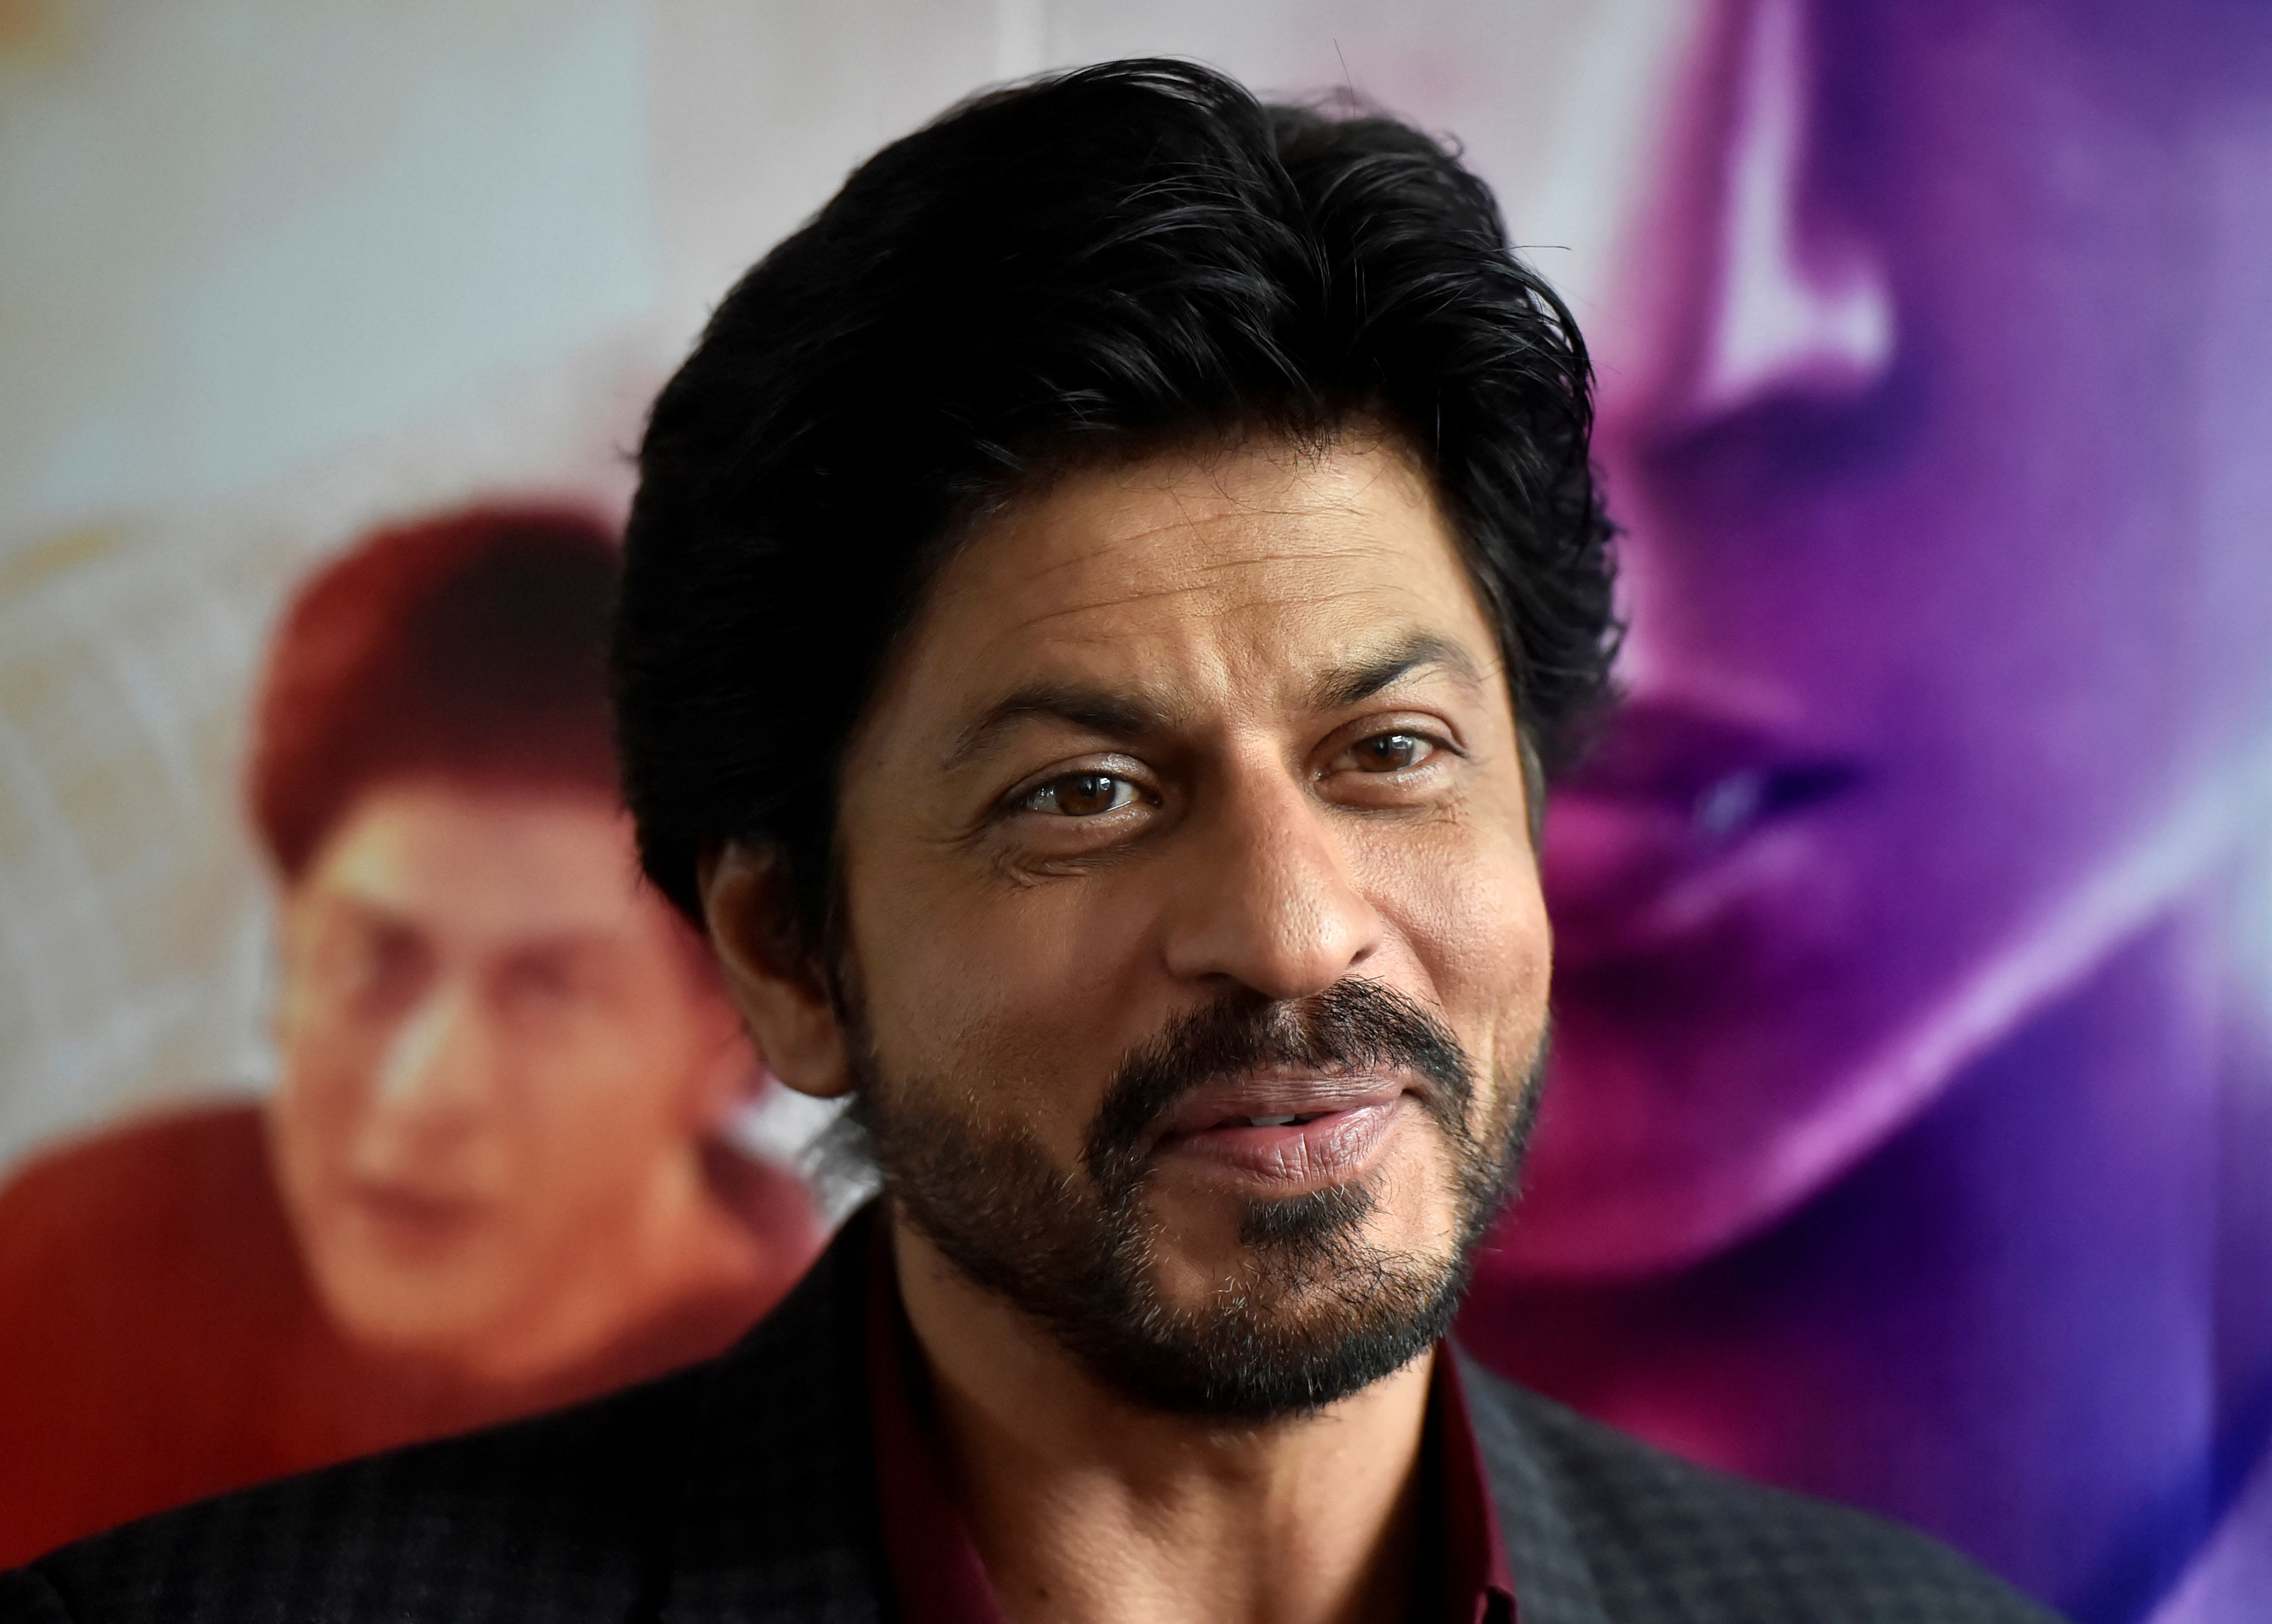 Shah Rukh Khan's spy film sees bumper Bollywood opening despite protests